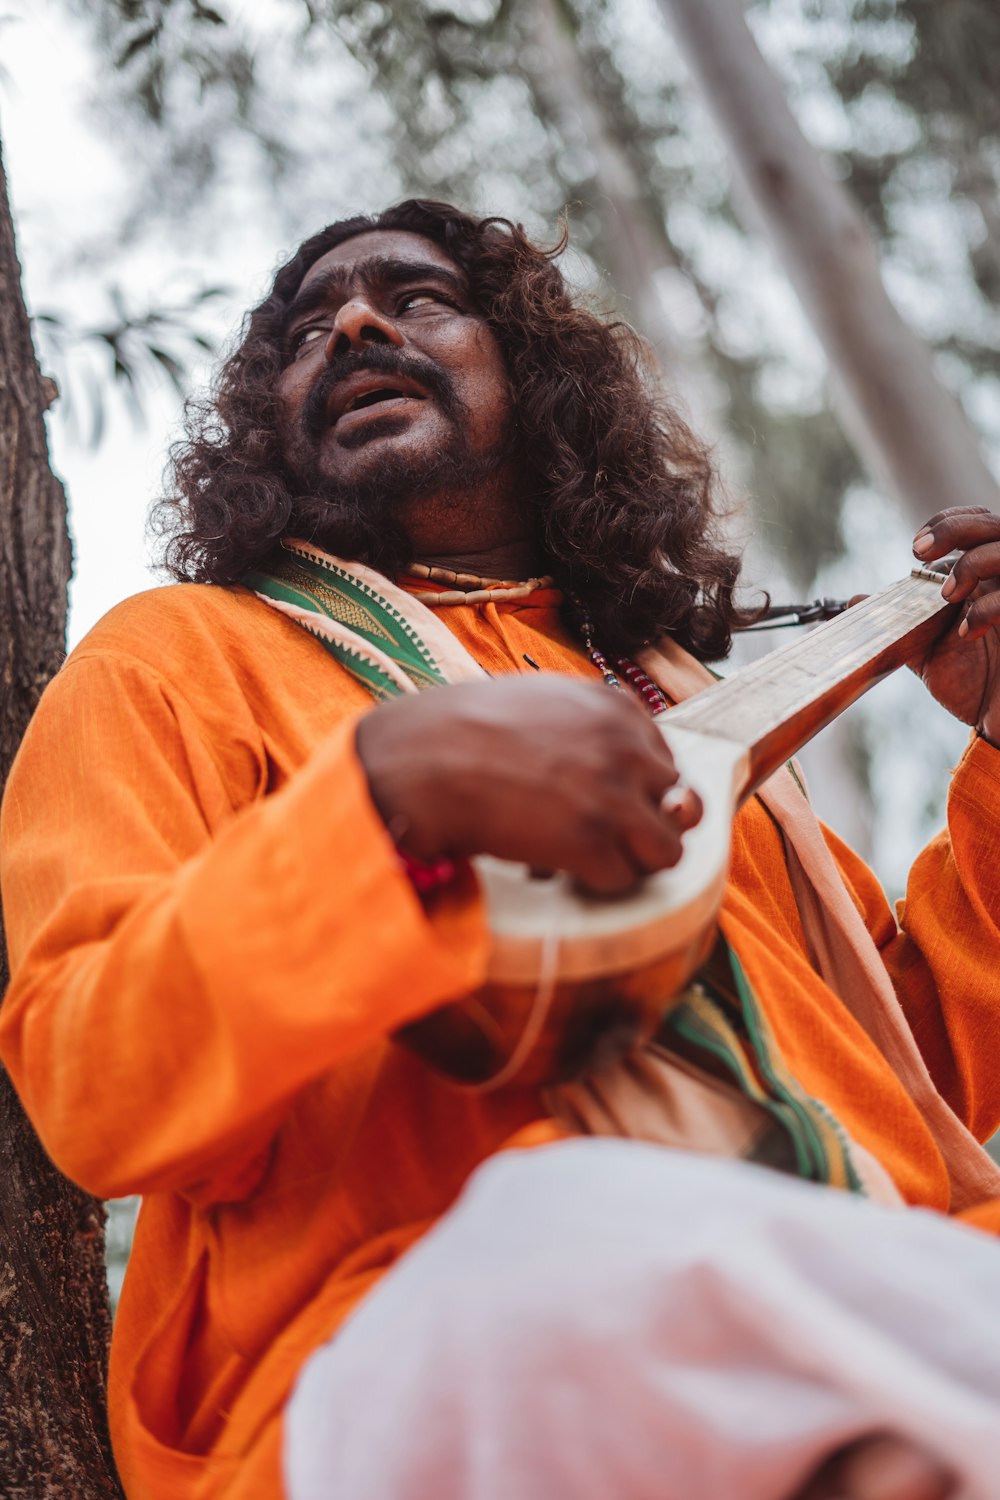 a man with long hair playing a musical instrument